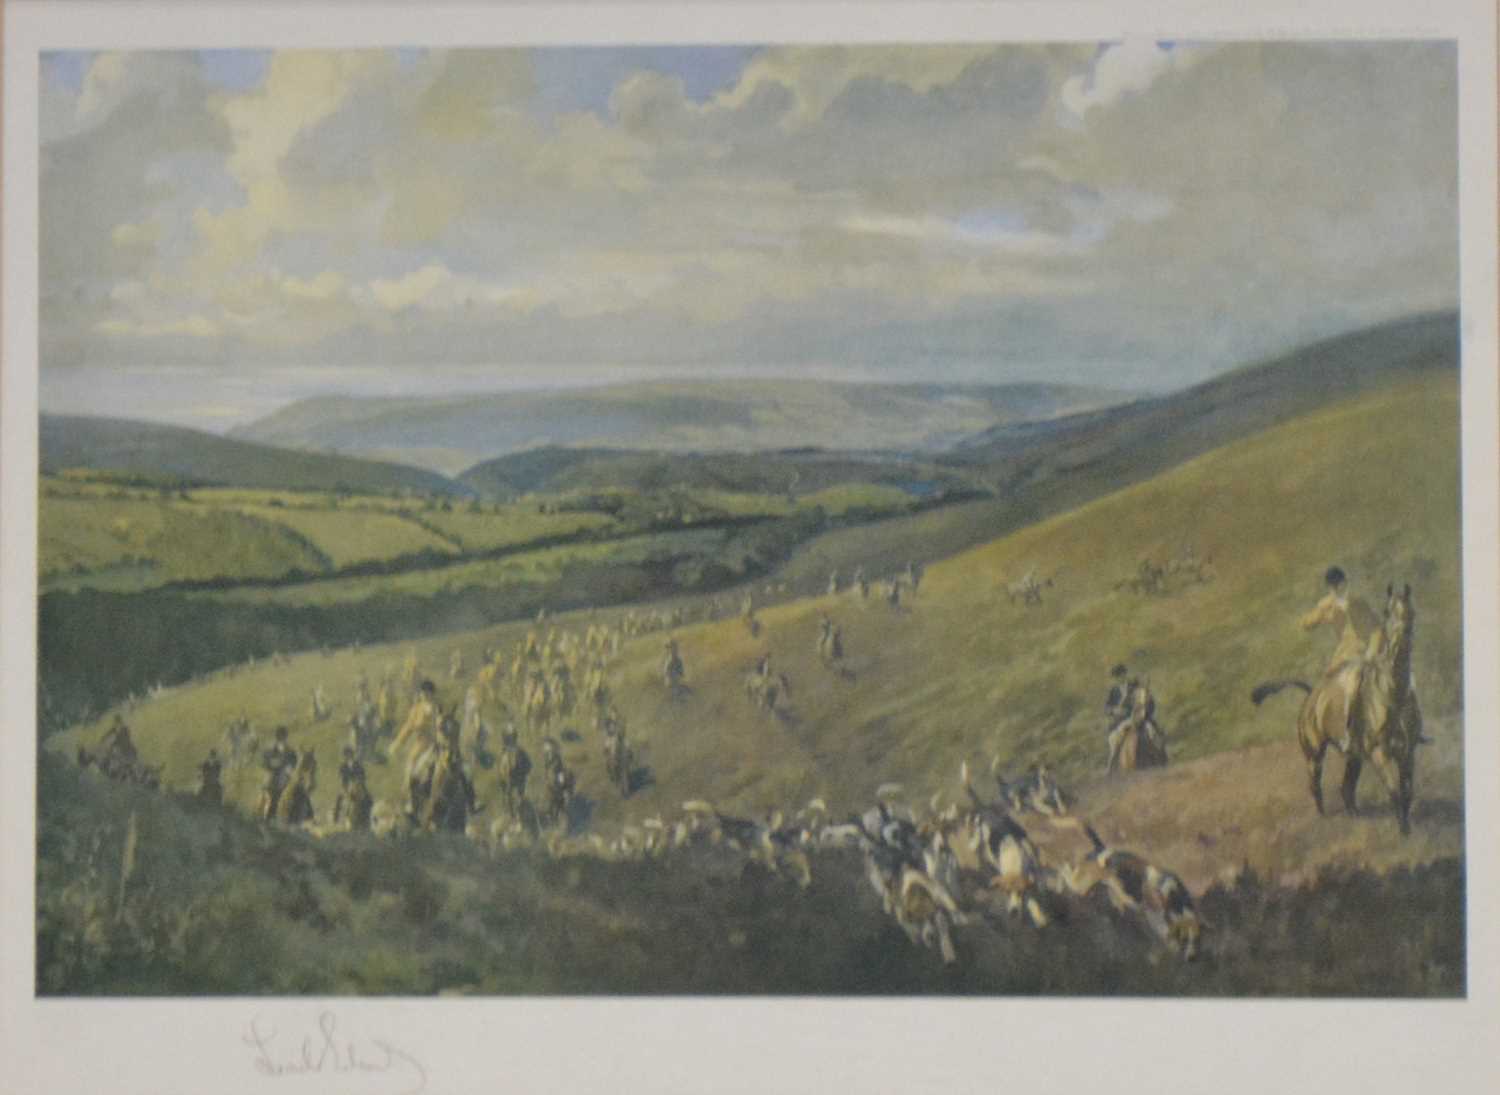 After Lionel Edwards, Hunting Countries - The Cotswold and The Waddon Chase, and other prints. - Image 3 of 14